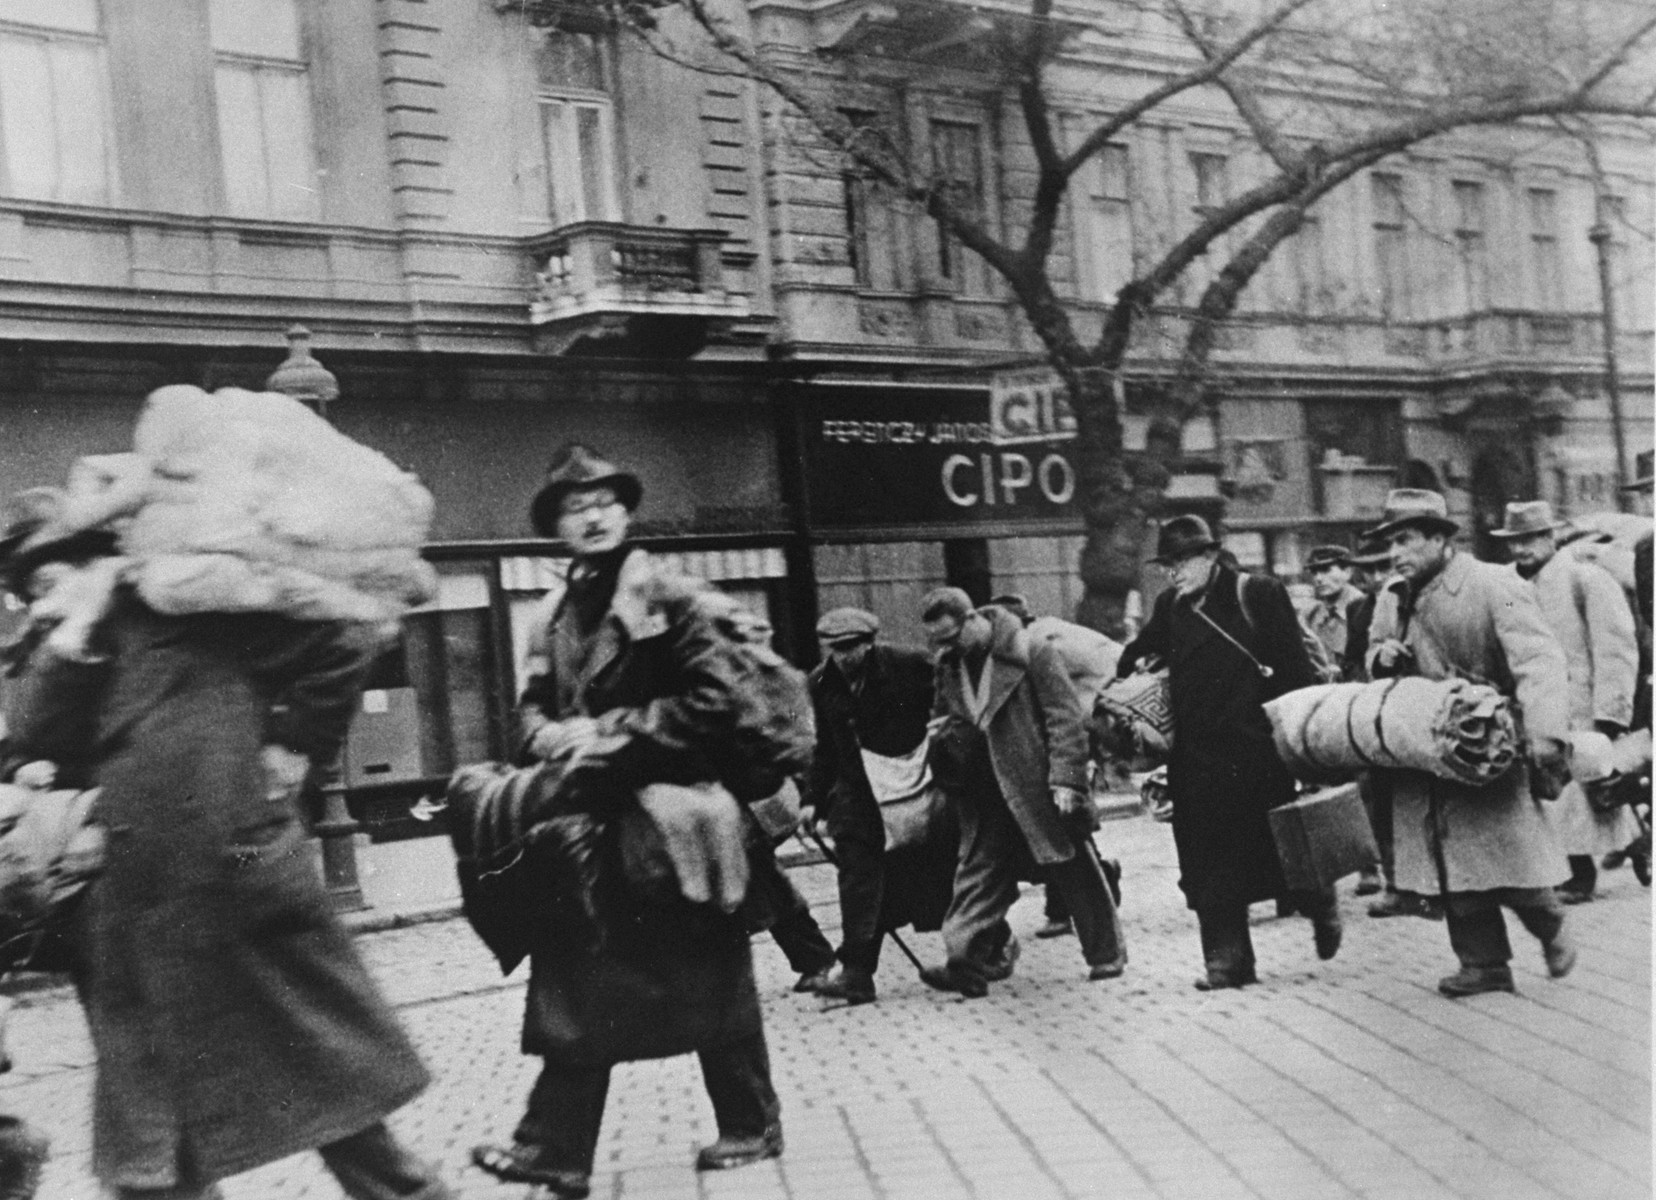 Hungarian Jews who were rescued from deportation by Raoul Wallenberg at the railroad station in the Józsefváros [Jozsefstadt] on November 28, 1944, walk along a street in Budapest on their way back to the "international ghetto". This photo was taken by Thomas Veres from Wallenberg's car as they drove past the group.